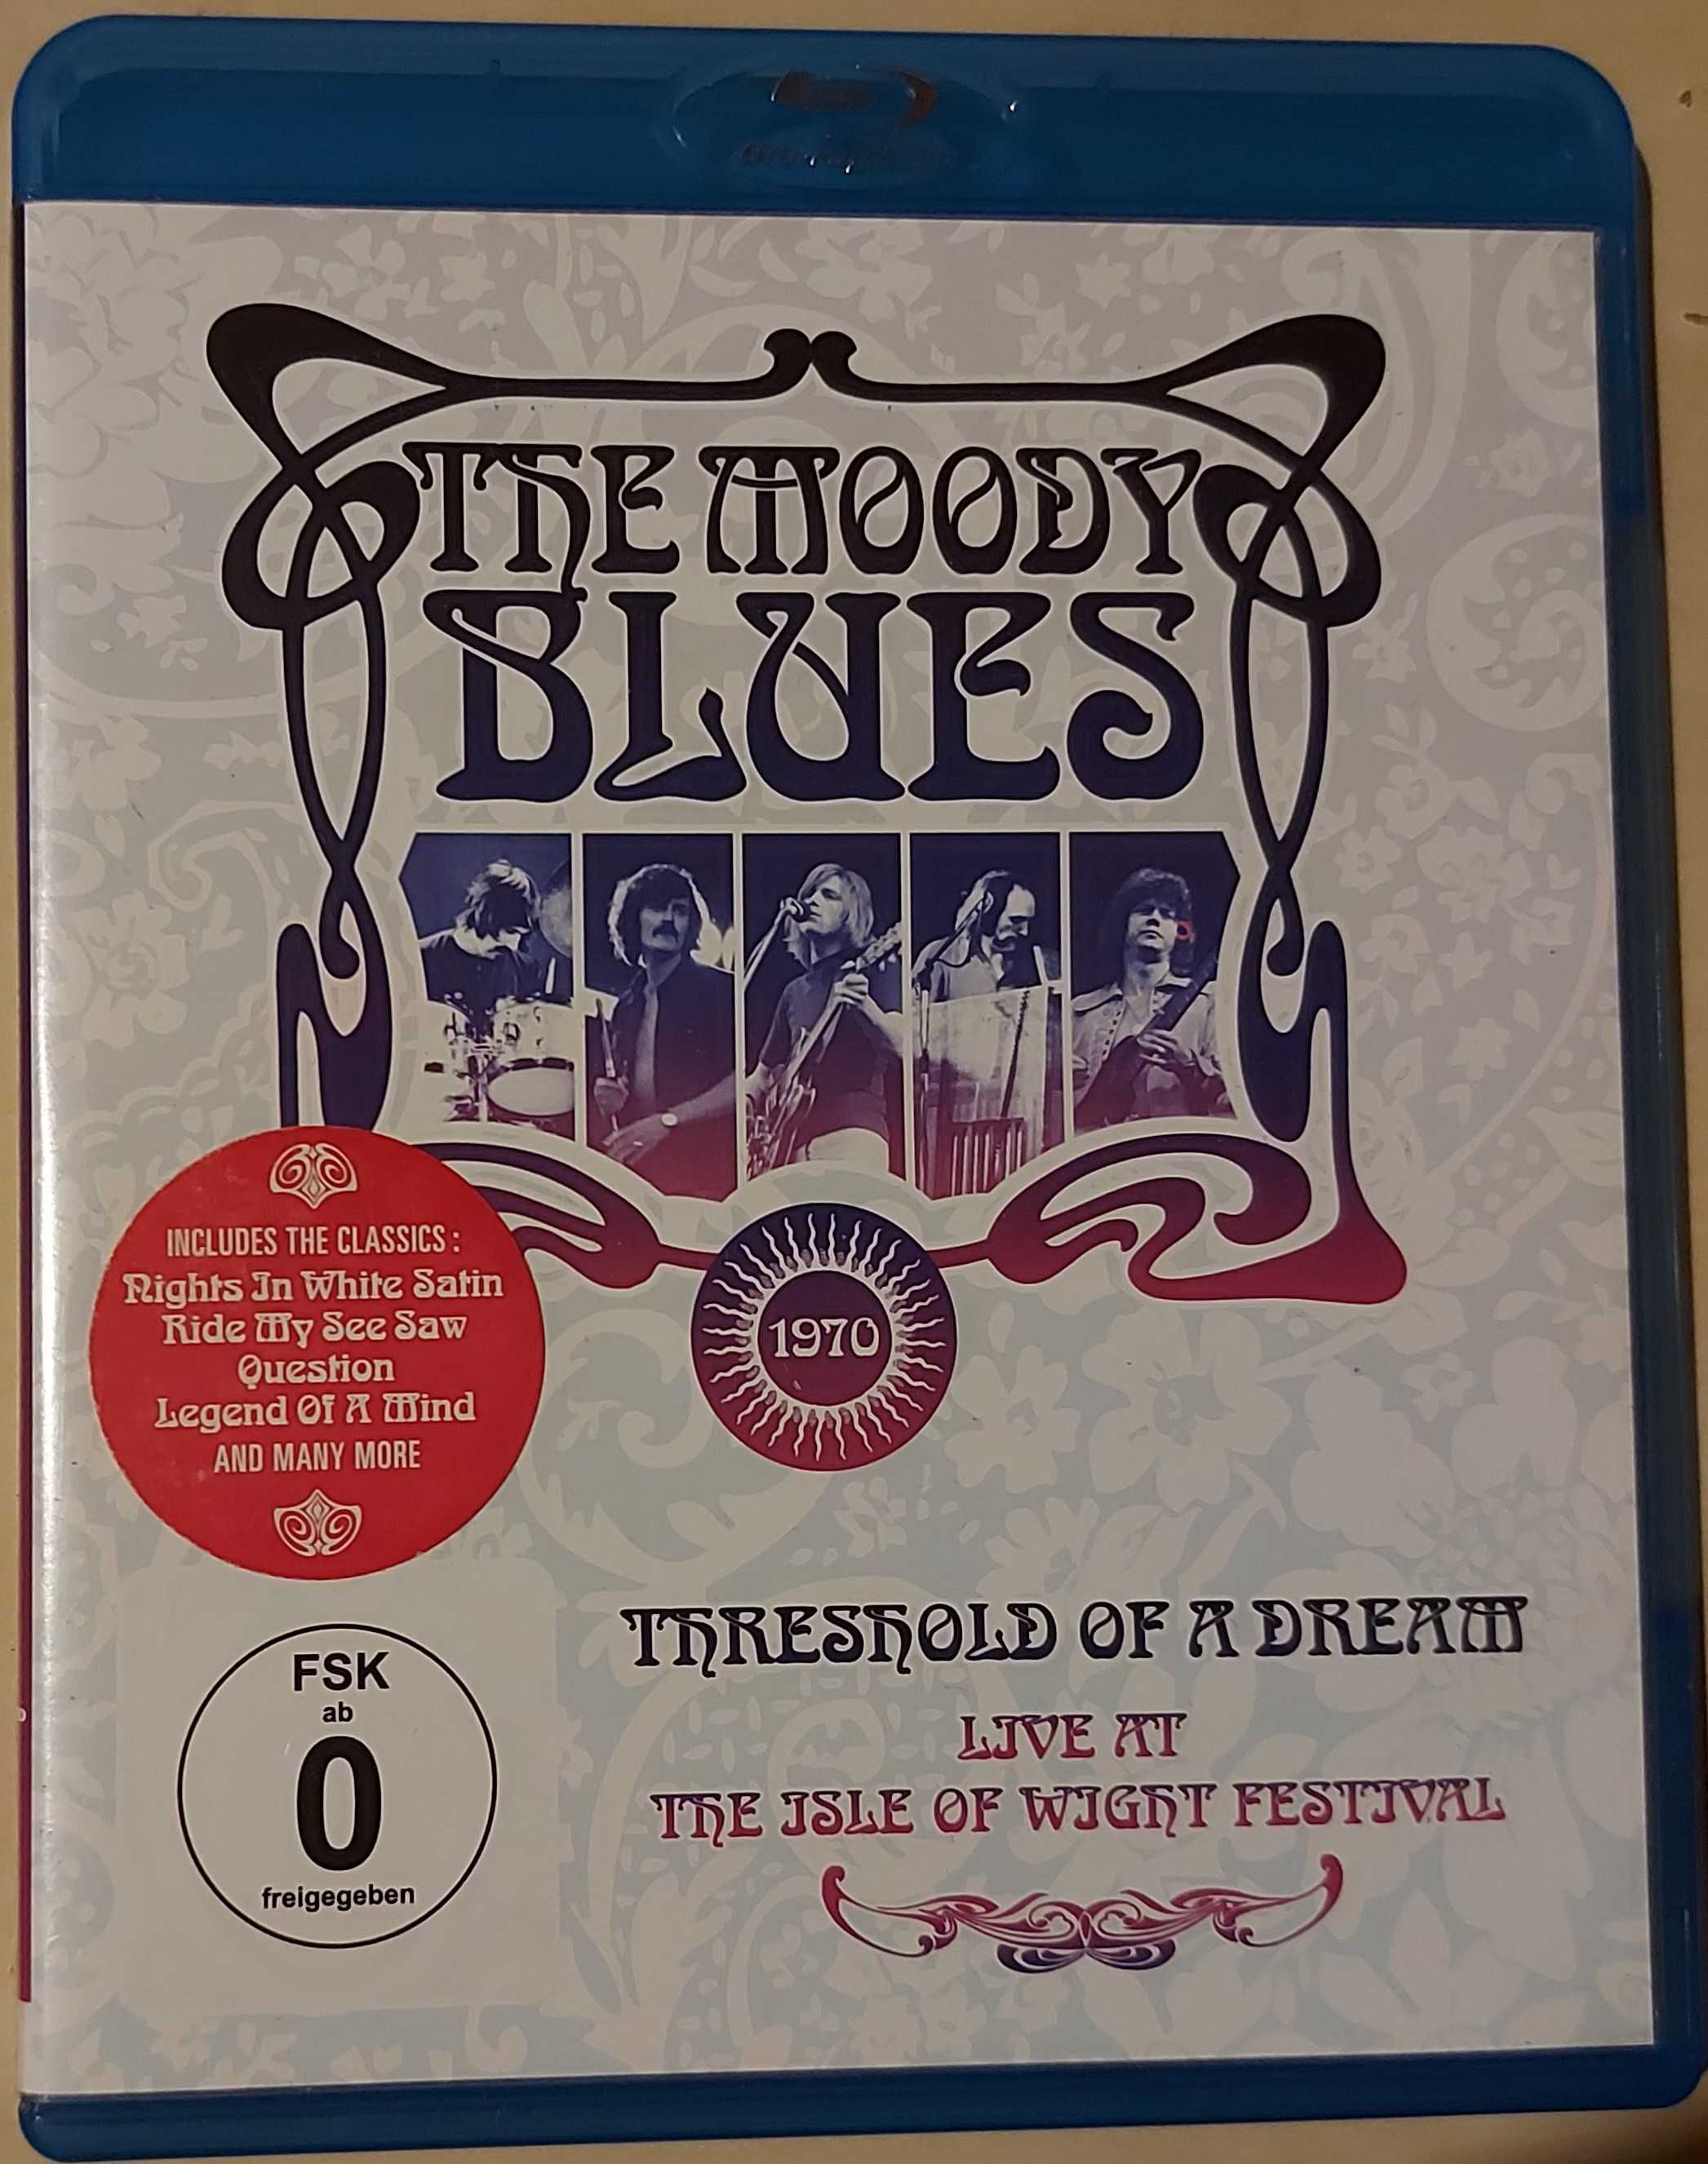 Blu-ray Moody Blues - Threshold of a dream live at Isle of Wight